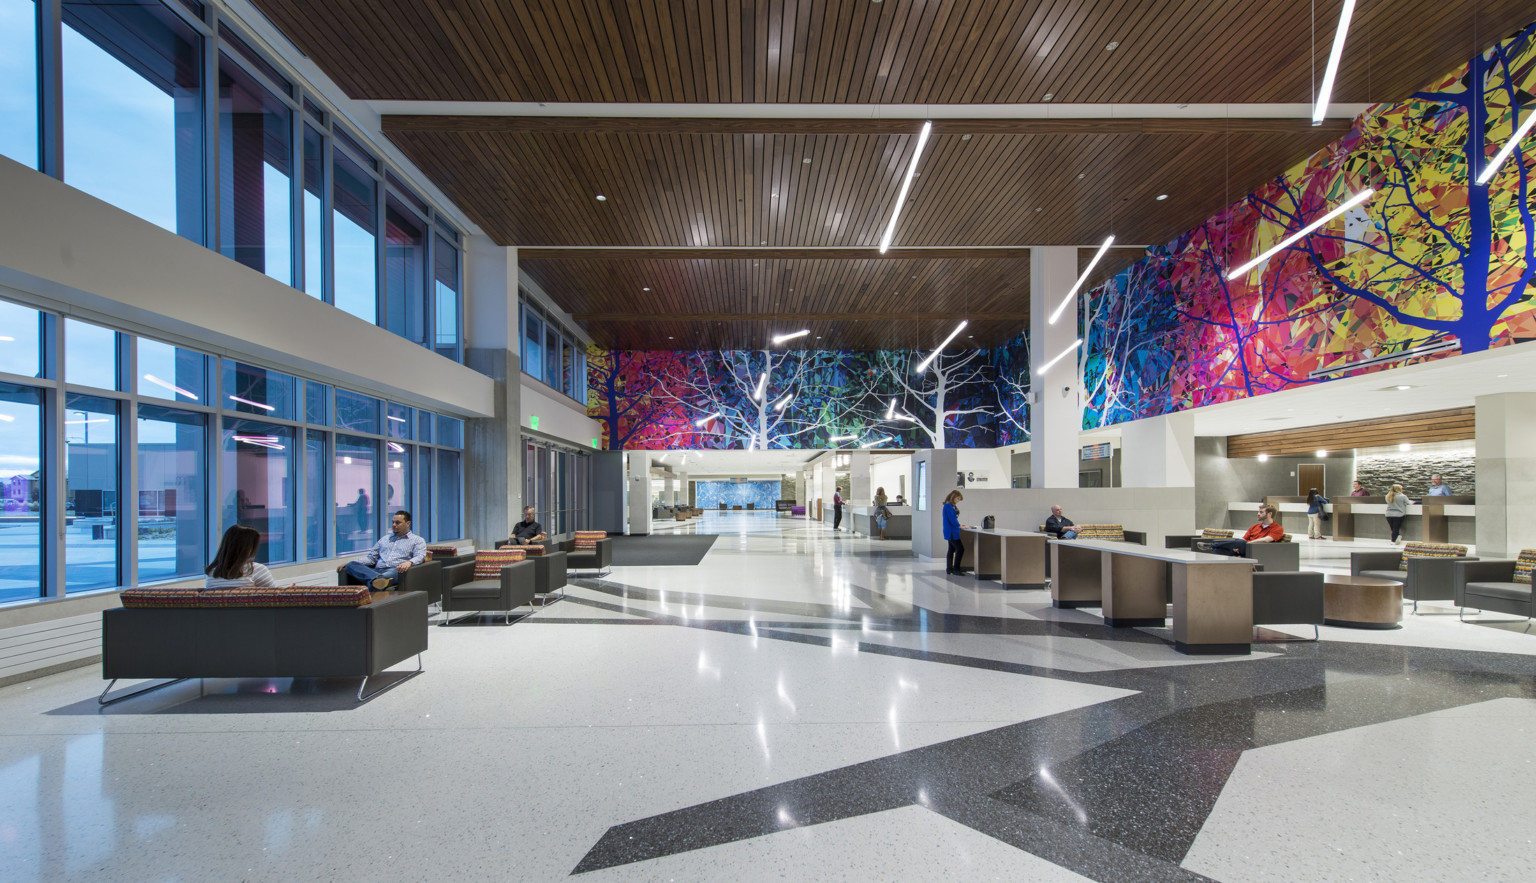 Interior lobby with colorful mural, seating space, desks, and wood detailed ceiling. Tall wall of windows lines the left wall